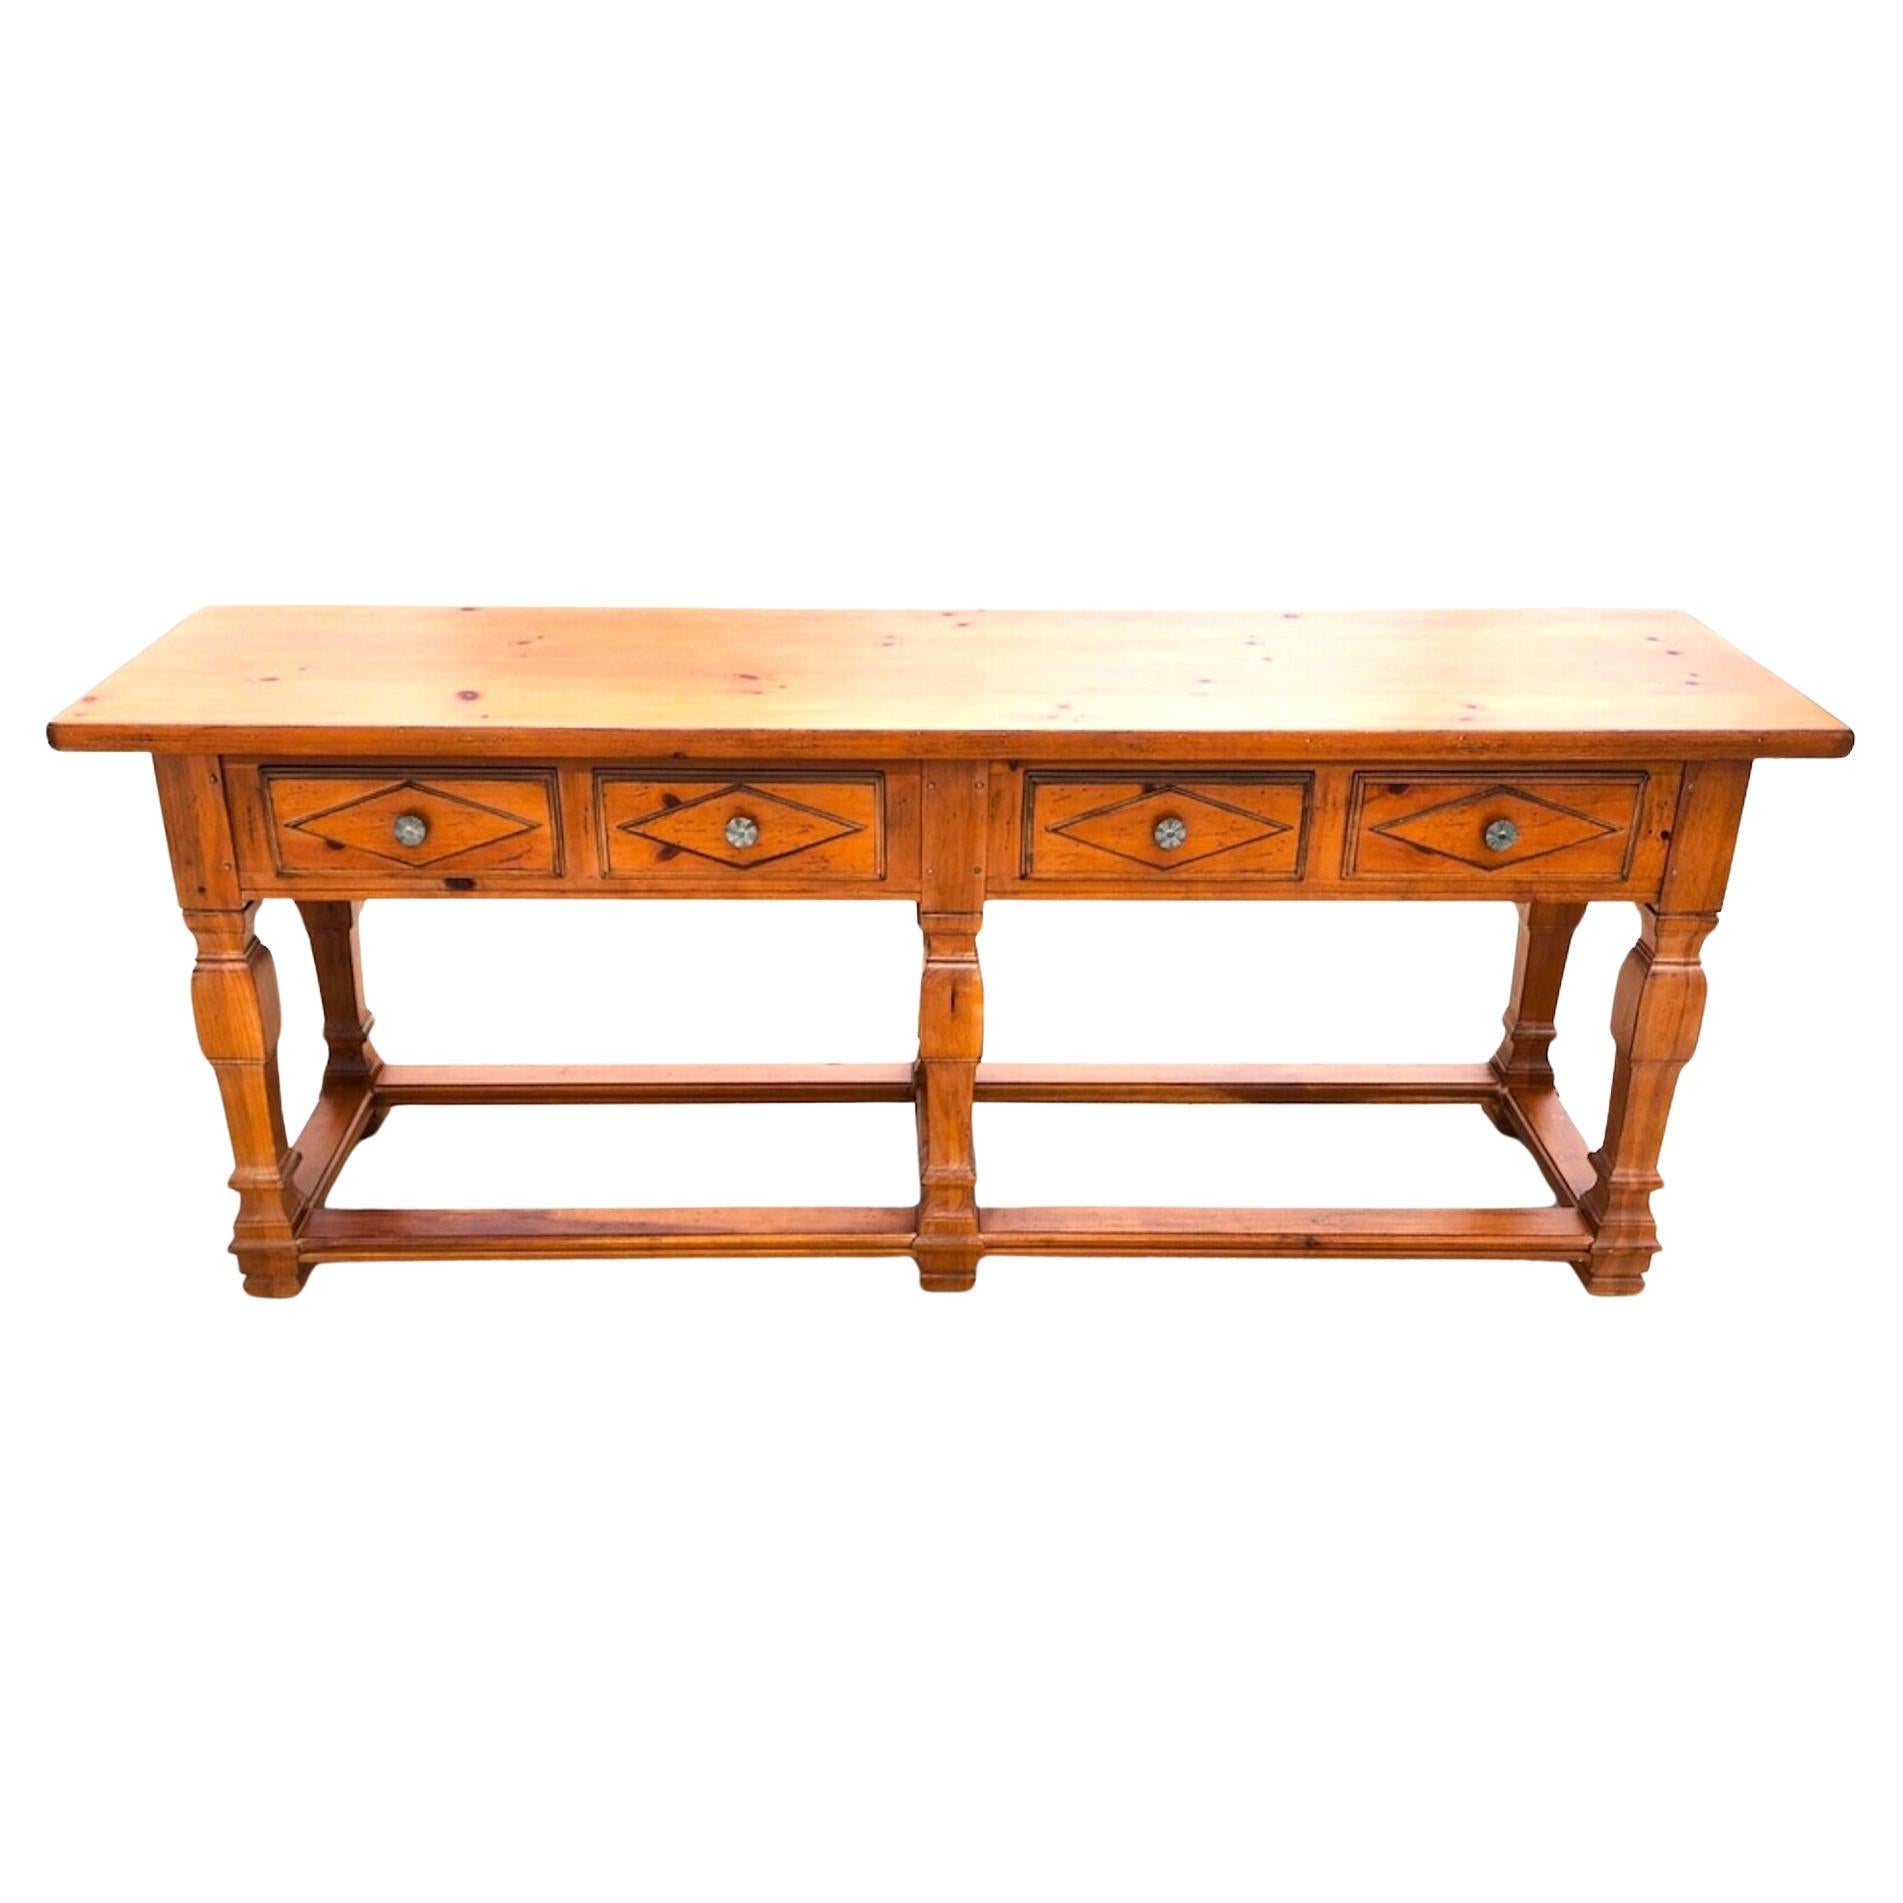 Huge Drexel Heritage Console Table 90" For Sale